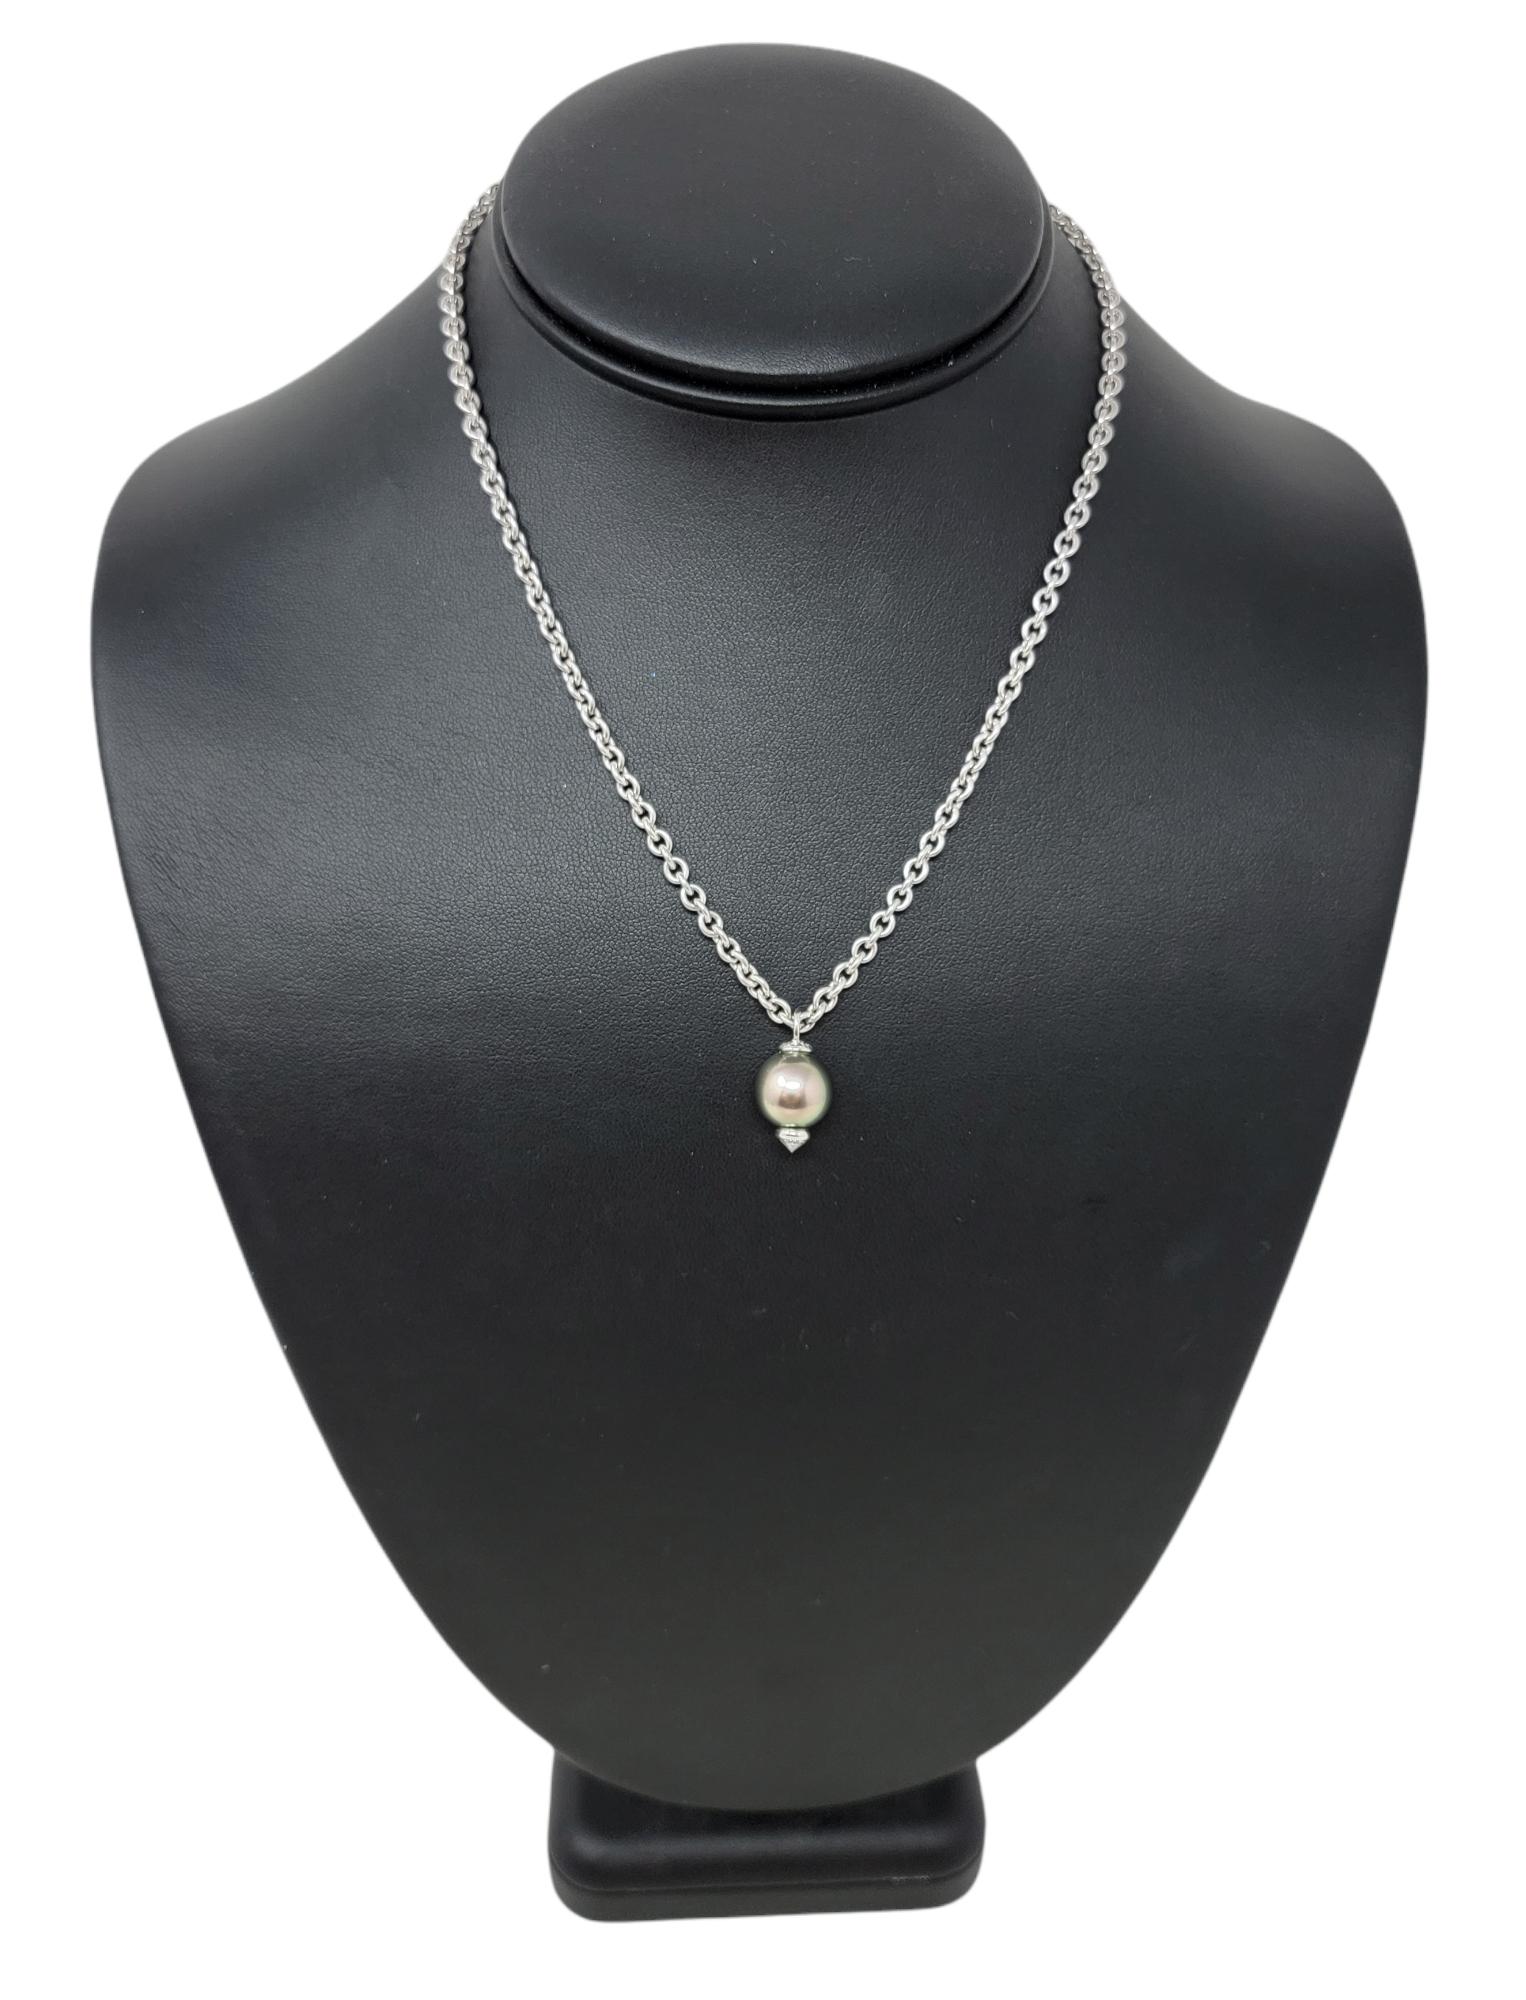 Tiffany & Co. Diamond and Cultured Tahitian Pearl Pendant Necklace in White Gold 3